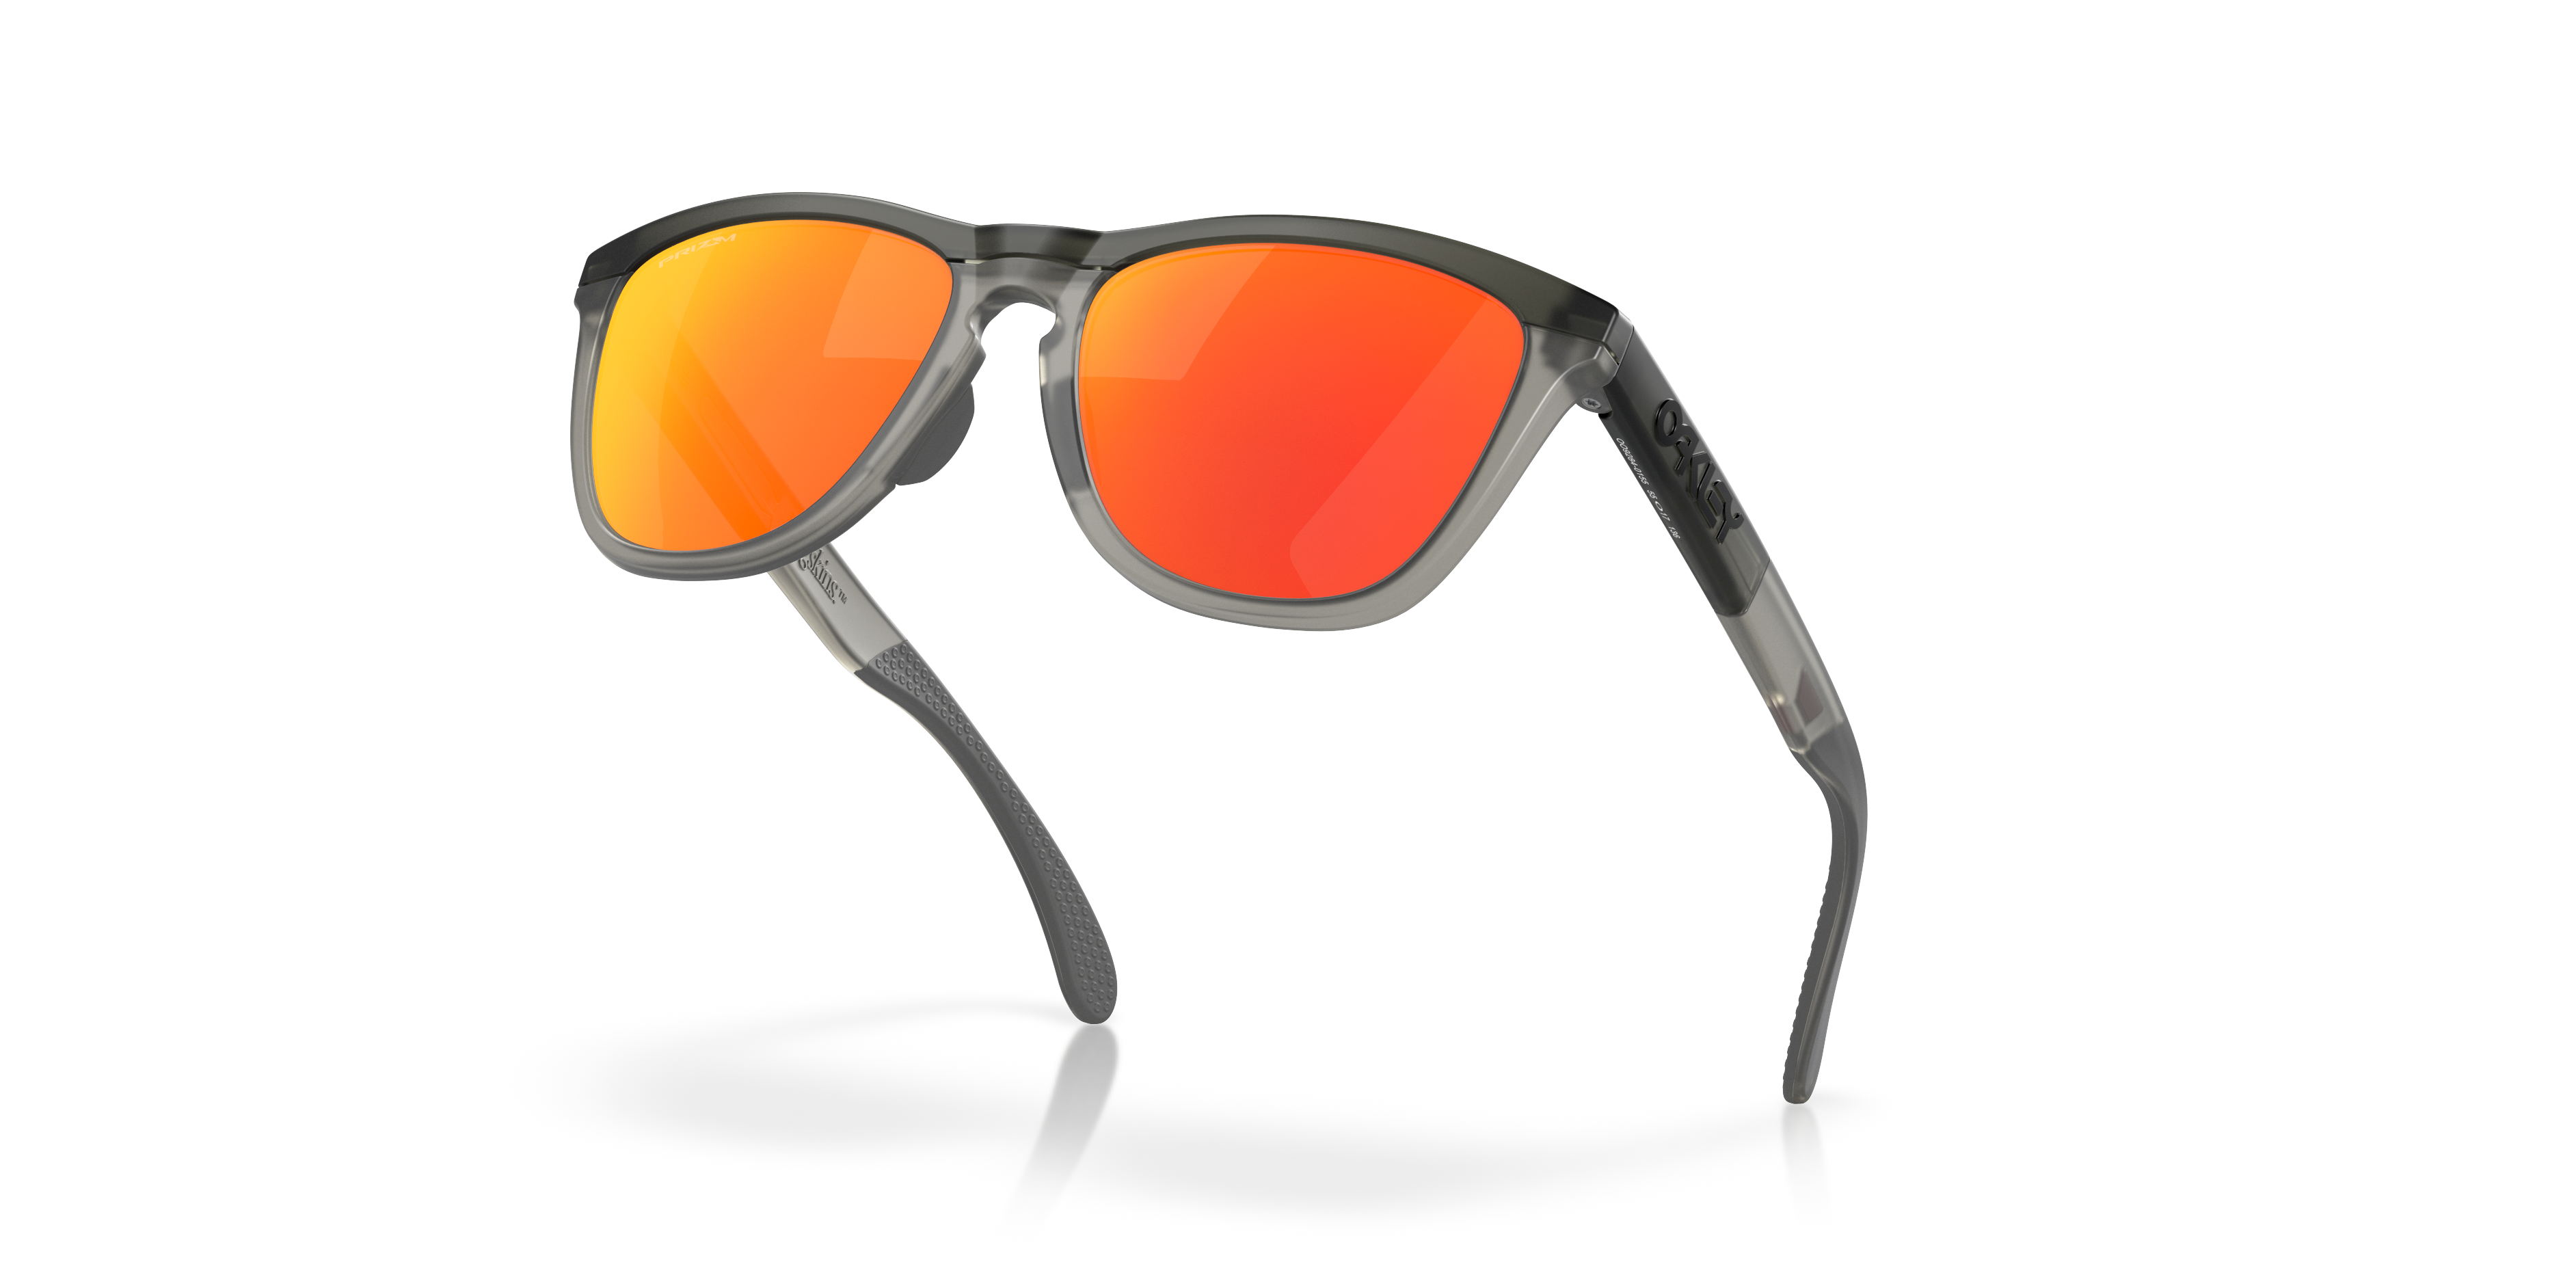 [products.image.bottom_up] Oakley Frogskins Range 0OO9284 928401